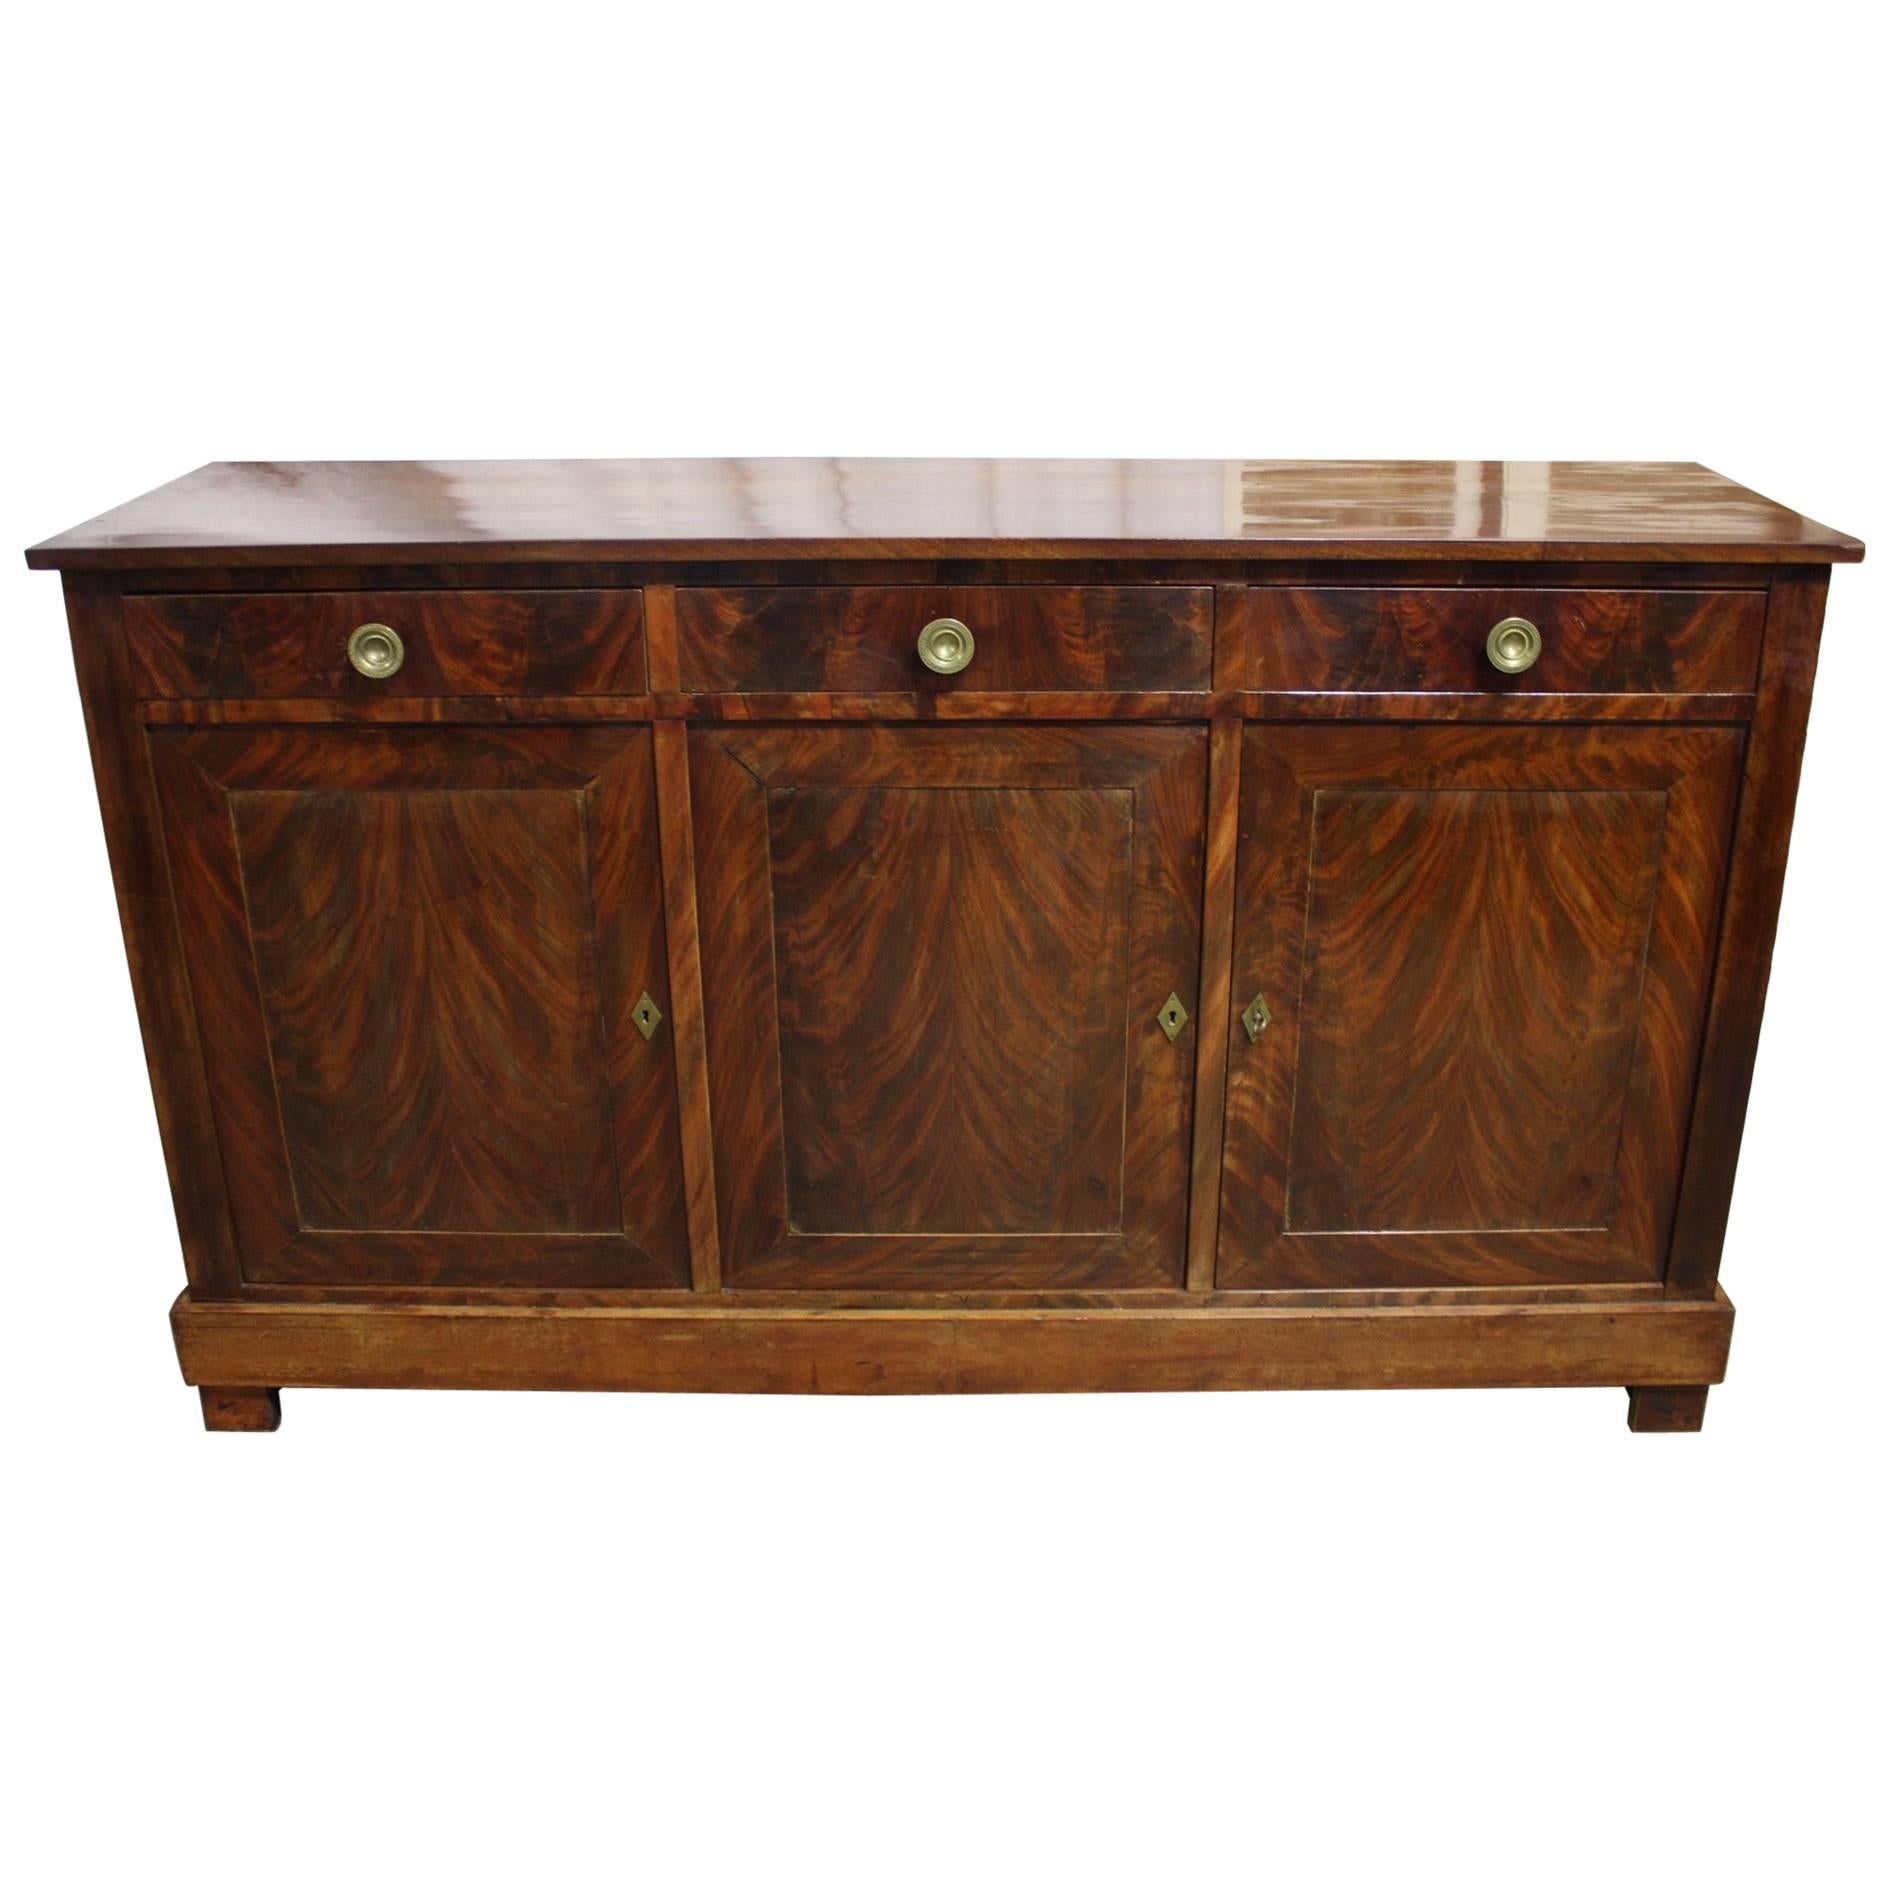 19th Century French Sideboard